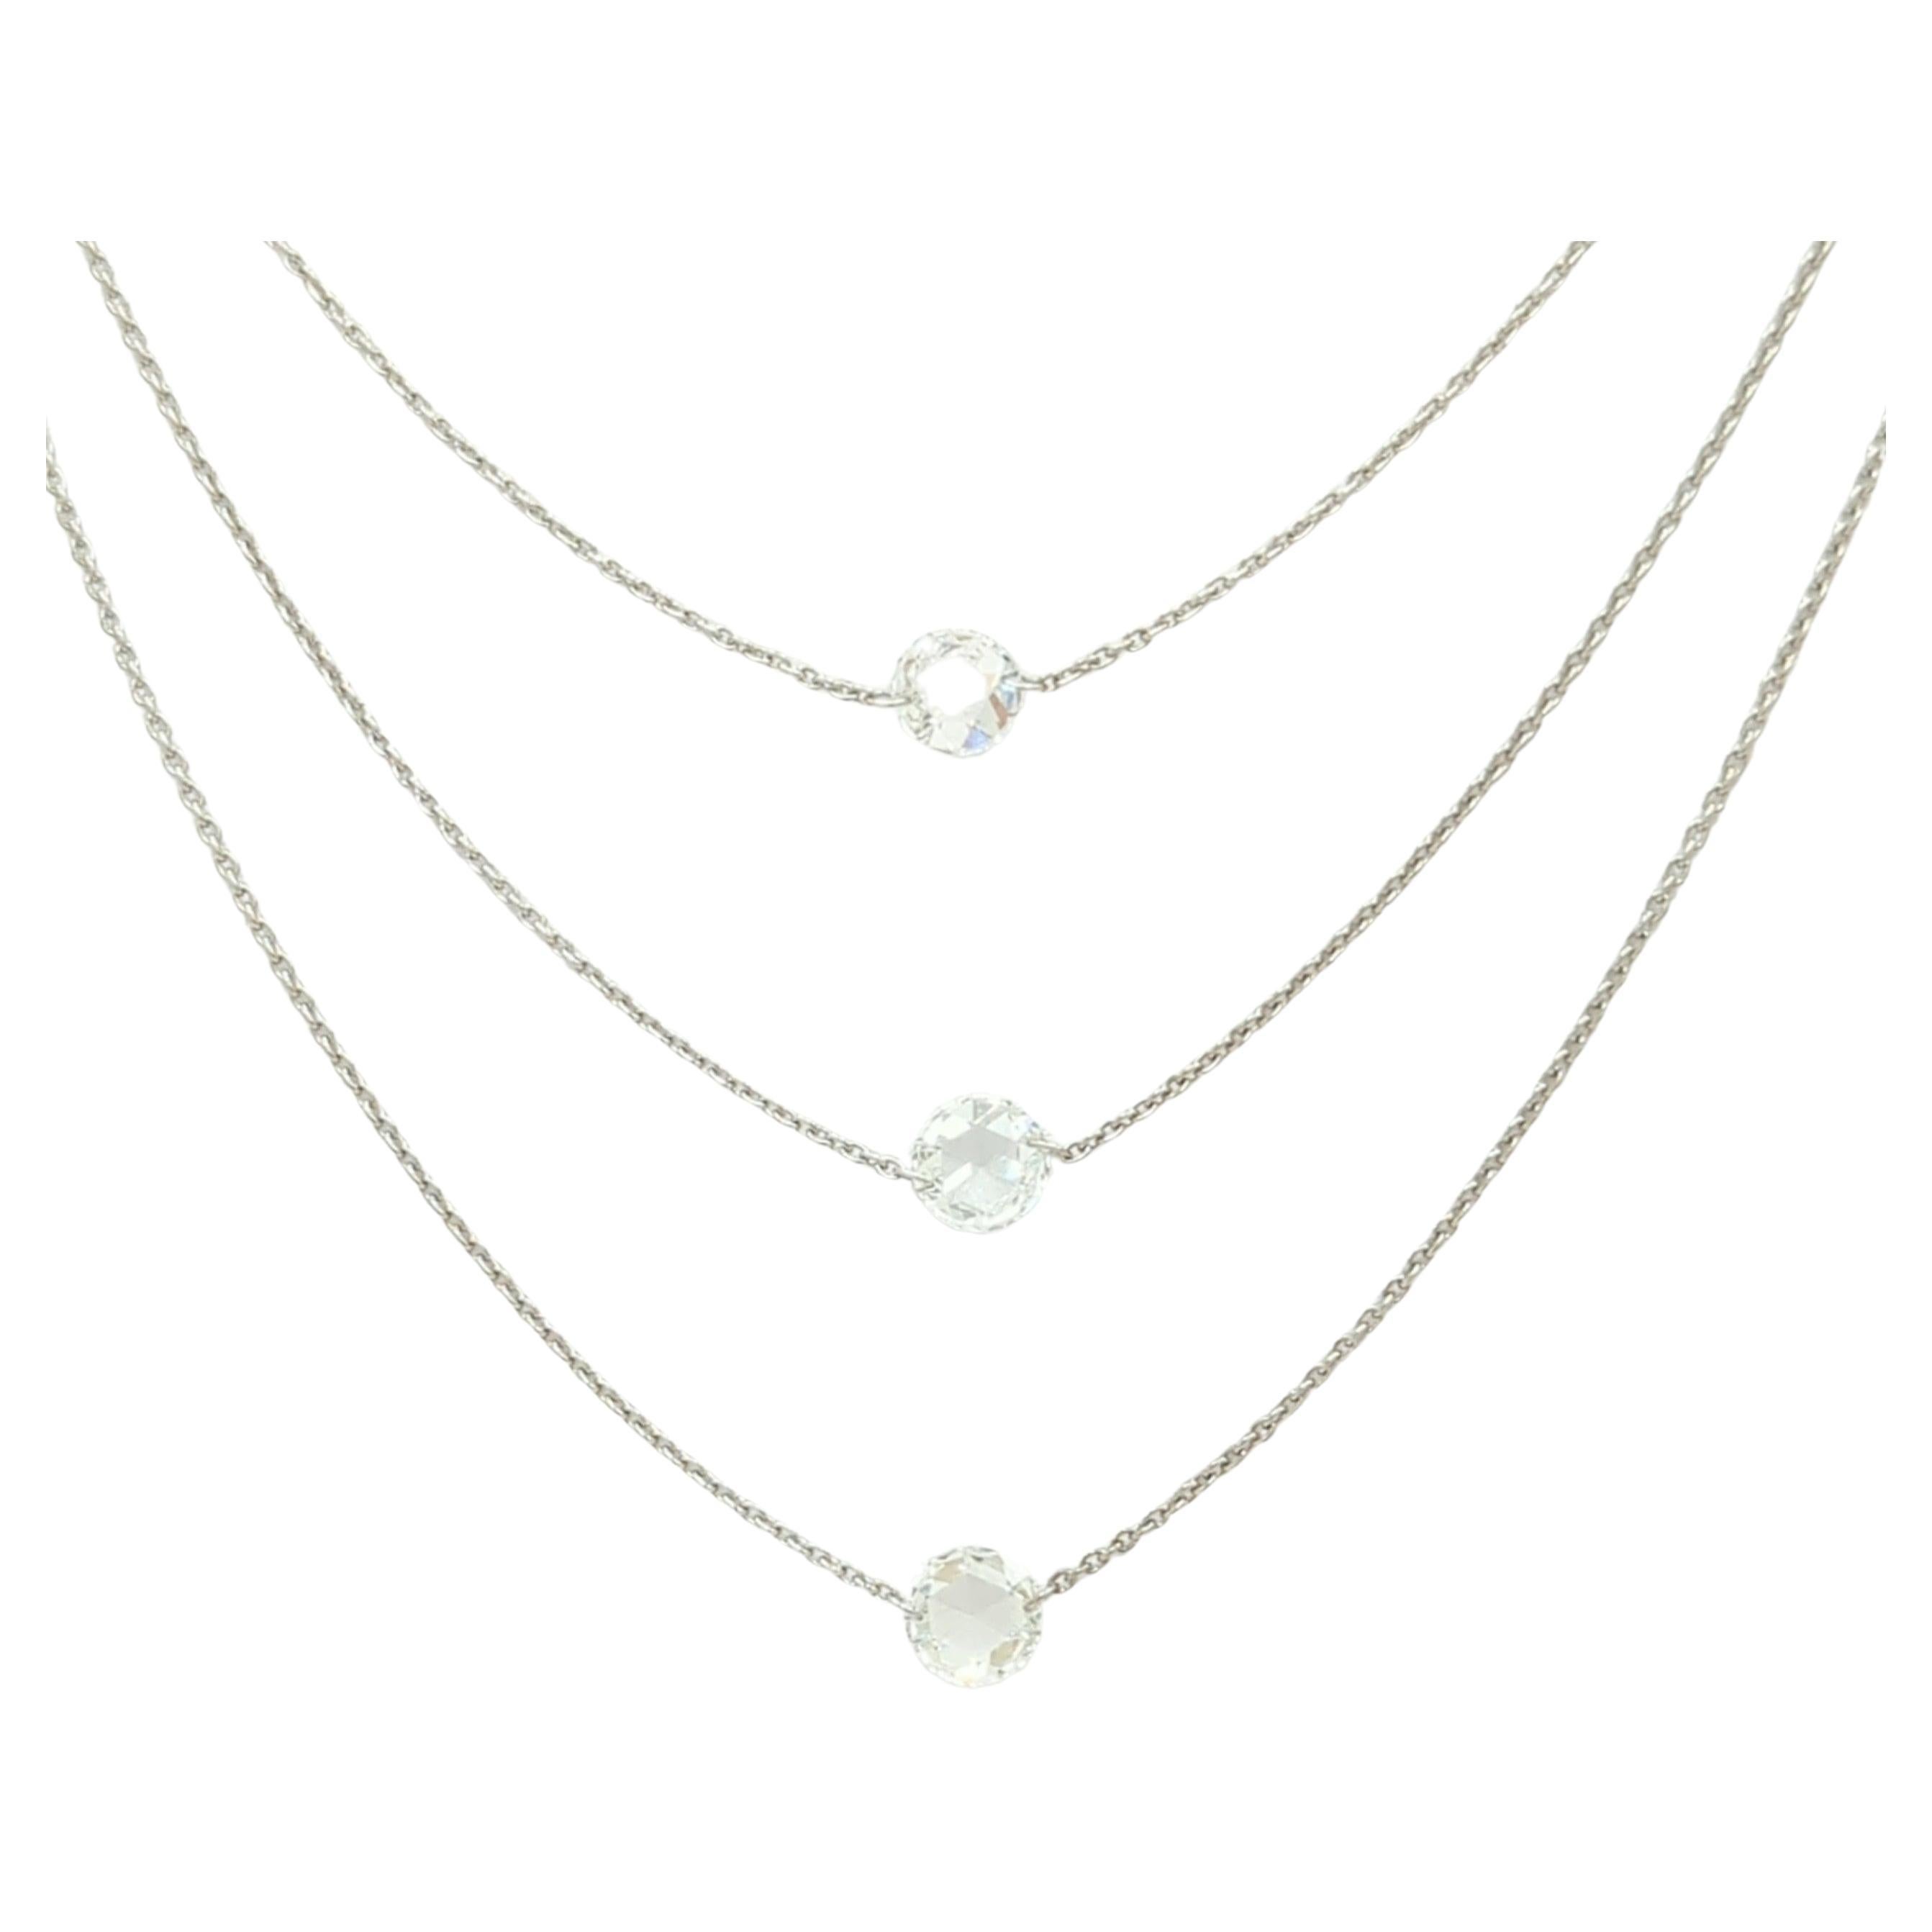 White Diamond Rose Cut 3 Layer Necklace in 18K White Gold